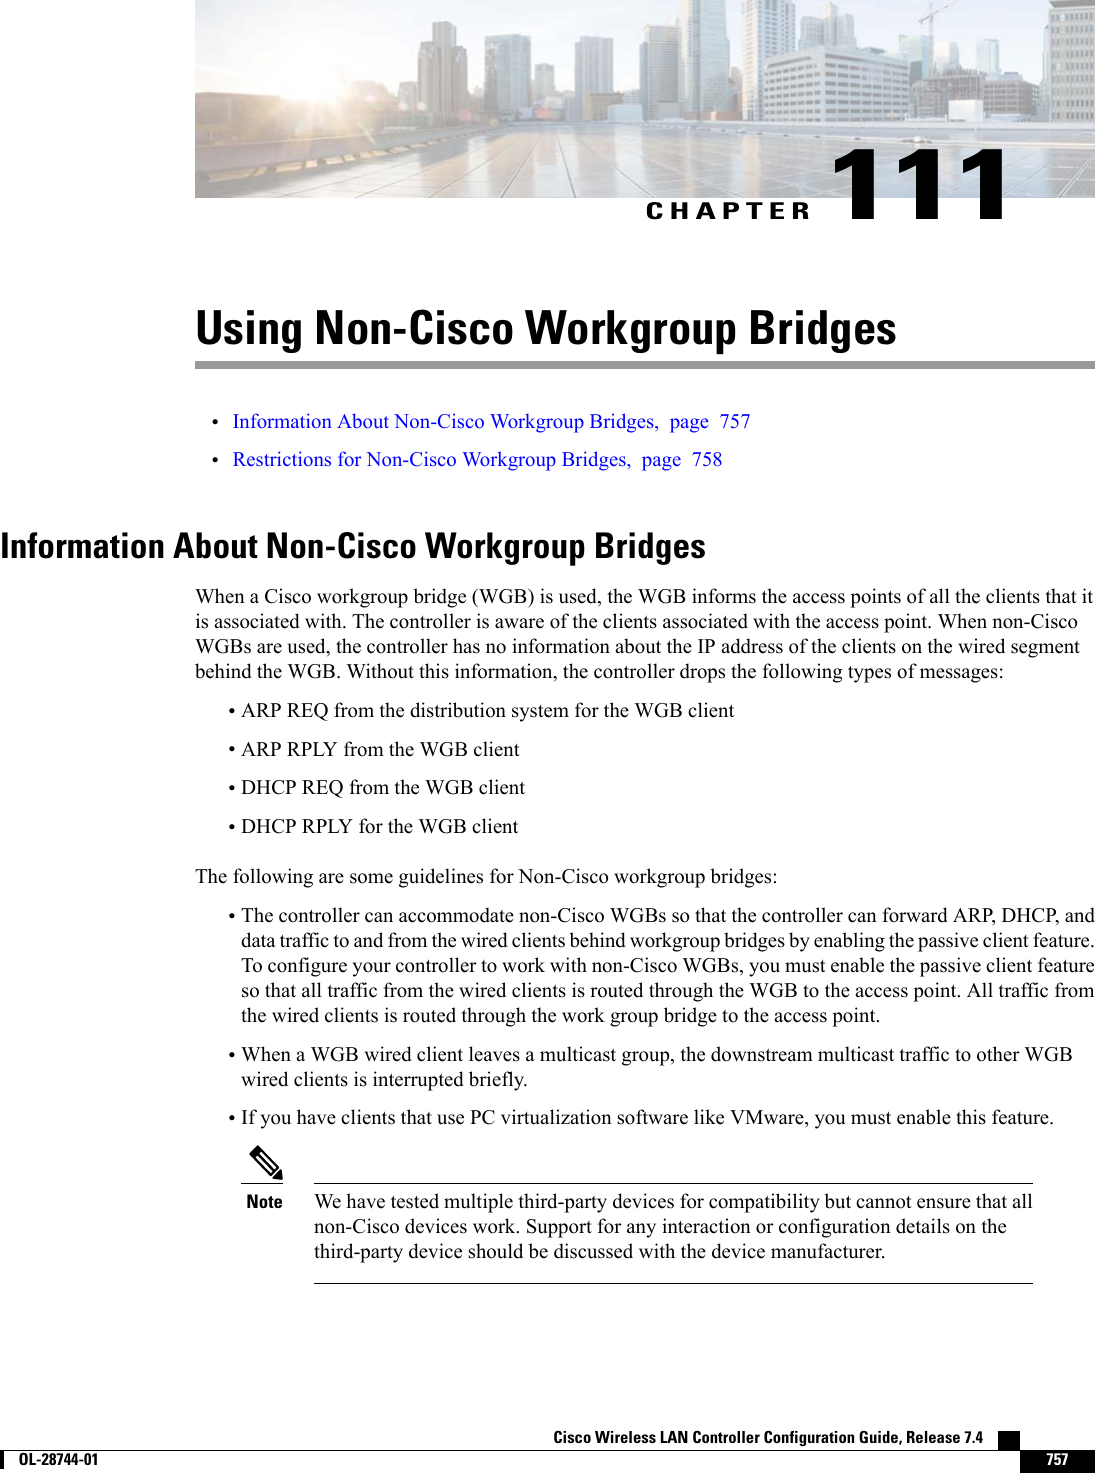 CHAPTER 111Using Non-Cisco Workgroup Bridges•Information About Non-Cisco Workgroup Bridges, page 757•Restrictions for Non-Cisco Workgroup Bridges, page 758Information About Non-Cisco Workgroup BridgesWhen a Cisco workgroup bridge (WGB) is used, the WGB informs the access points of all the clients that itis associated with. The controller is aware of the clients associated with the access point. When non-CiscoWGBs are used, the controller has no information about the IP address of the clients on the wired segmentbehind the WGB. Without this information, the controller drops the following types of messages:•ARP REQ from the distribution system for the WGB client•ARP RPLY from the WGB client•DHCP REQ from the WGB client•DHCP RPLY for the WGB clientThe following are some guidelines for Non-Cisco workgroup bridges:•The controller can accommodate non-Cisco WGBs so that the controller can forward ARP, DHCP, anddata traffic to and from the wired clients behind workgroup bridges by enabling the passive client feature.To configure your controller to work with non-Cisco WGBs, you must enable the passive client featureso that all traffic from the wired clients is routed through the WGB to the access point. All traffic fromthe wired clients is routed through the work group bridge to the access point.•When a WGB wired client leaves a multicast group, the downstream multicast traffic to other WGBwired clients is interrupted briefly.•If you have clients that use PC virtualization software like VMware, you must enable this feature.We have tested multiple third-party devices for compatibility but cannot ensure that allnon-Cisco devices work. Support for any interaction or configuration details on thethird-party device should be discussed with the device manufacturer.NoteCisco Wireless LAN Controller Configuration Guide, Release 7.4        OL-28744-01 757